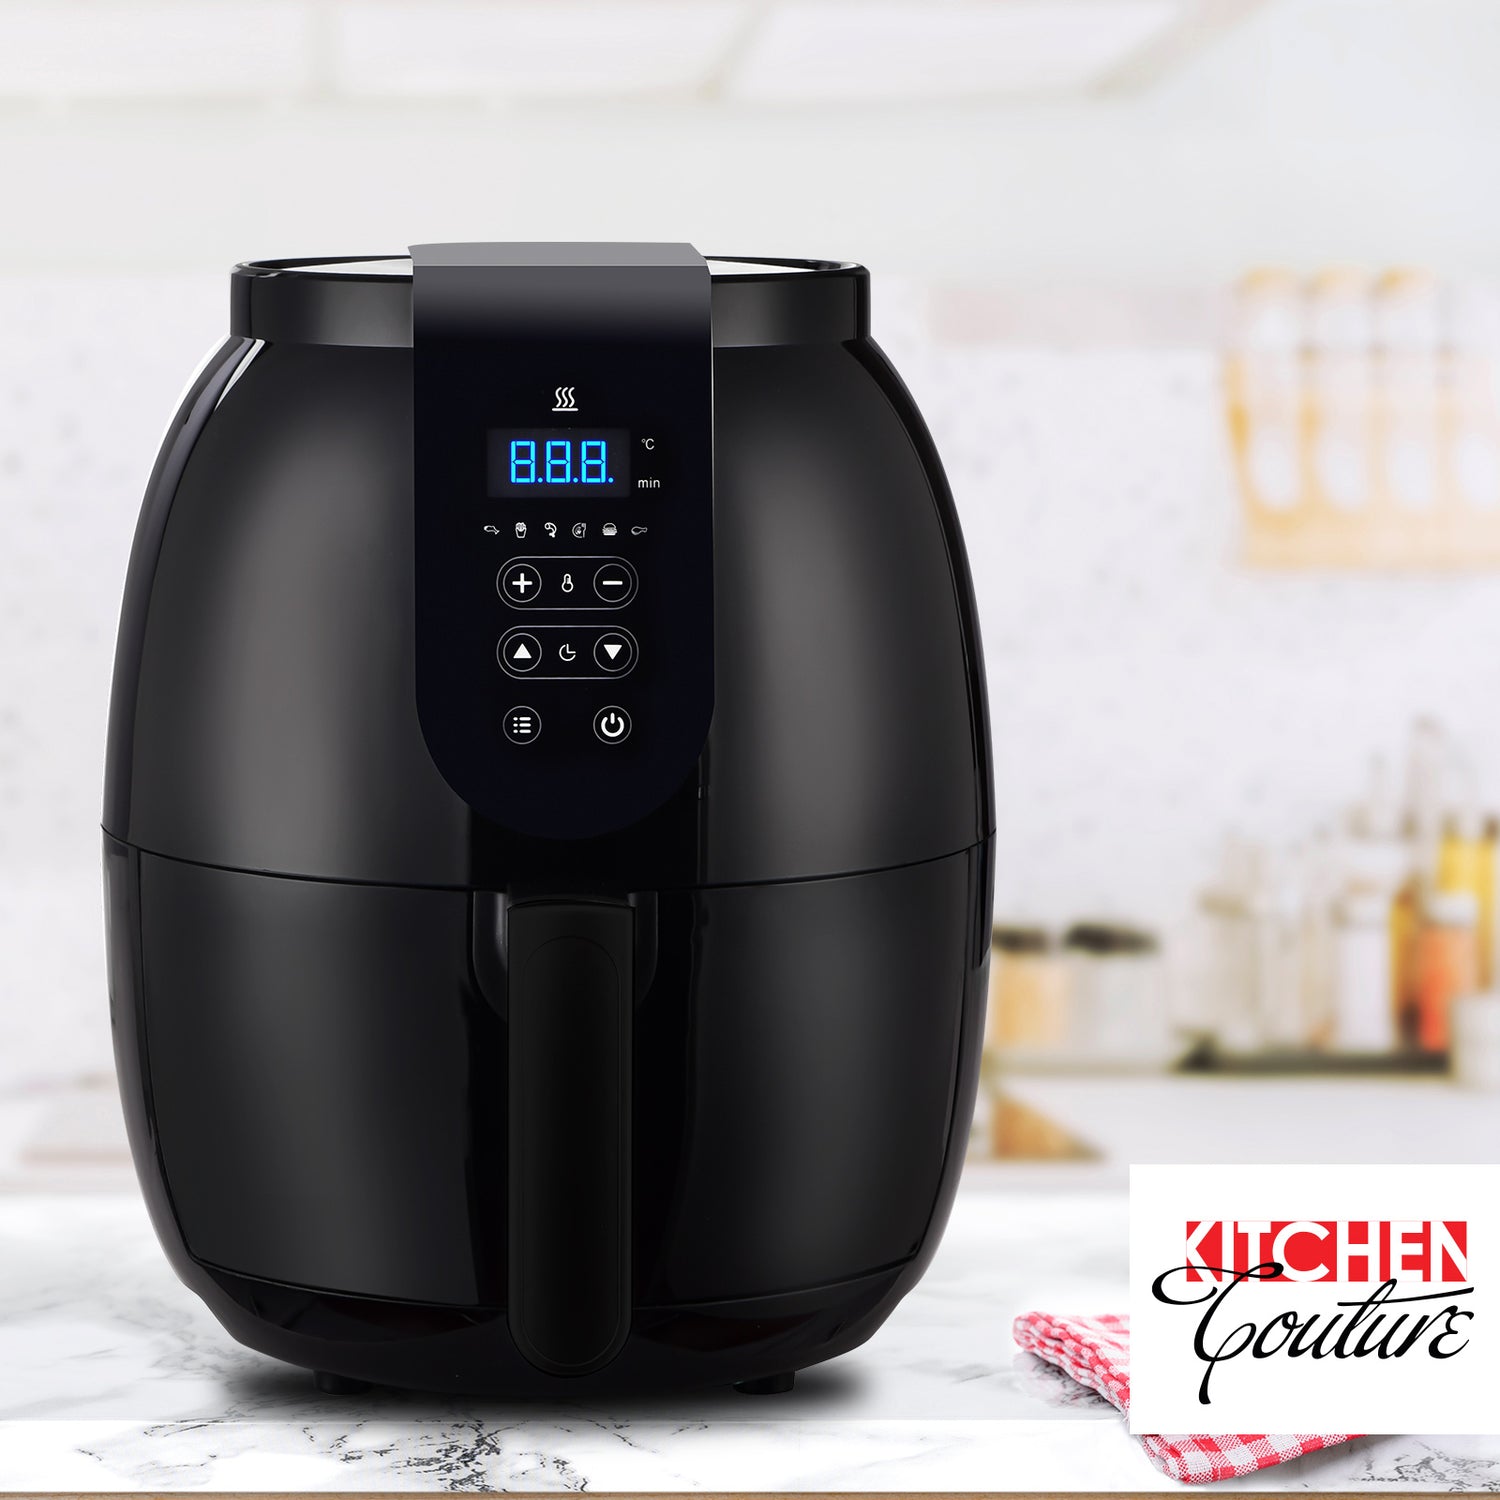 Kitchen Couture 3.5 Litre Digital Display Air Fryer Oil Free Cooking-Small Kitchen Appliances-PEROZ Accessories